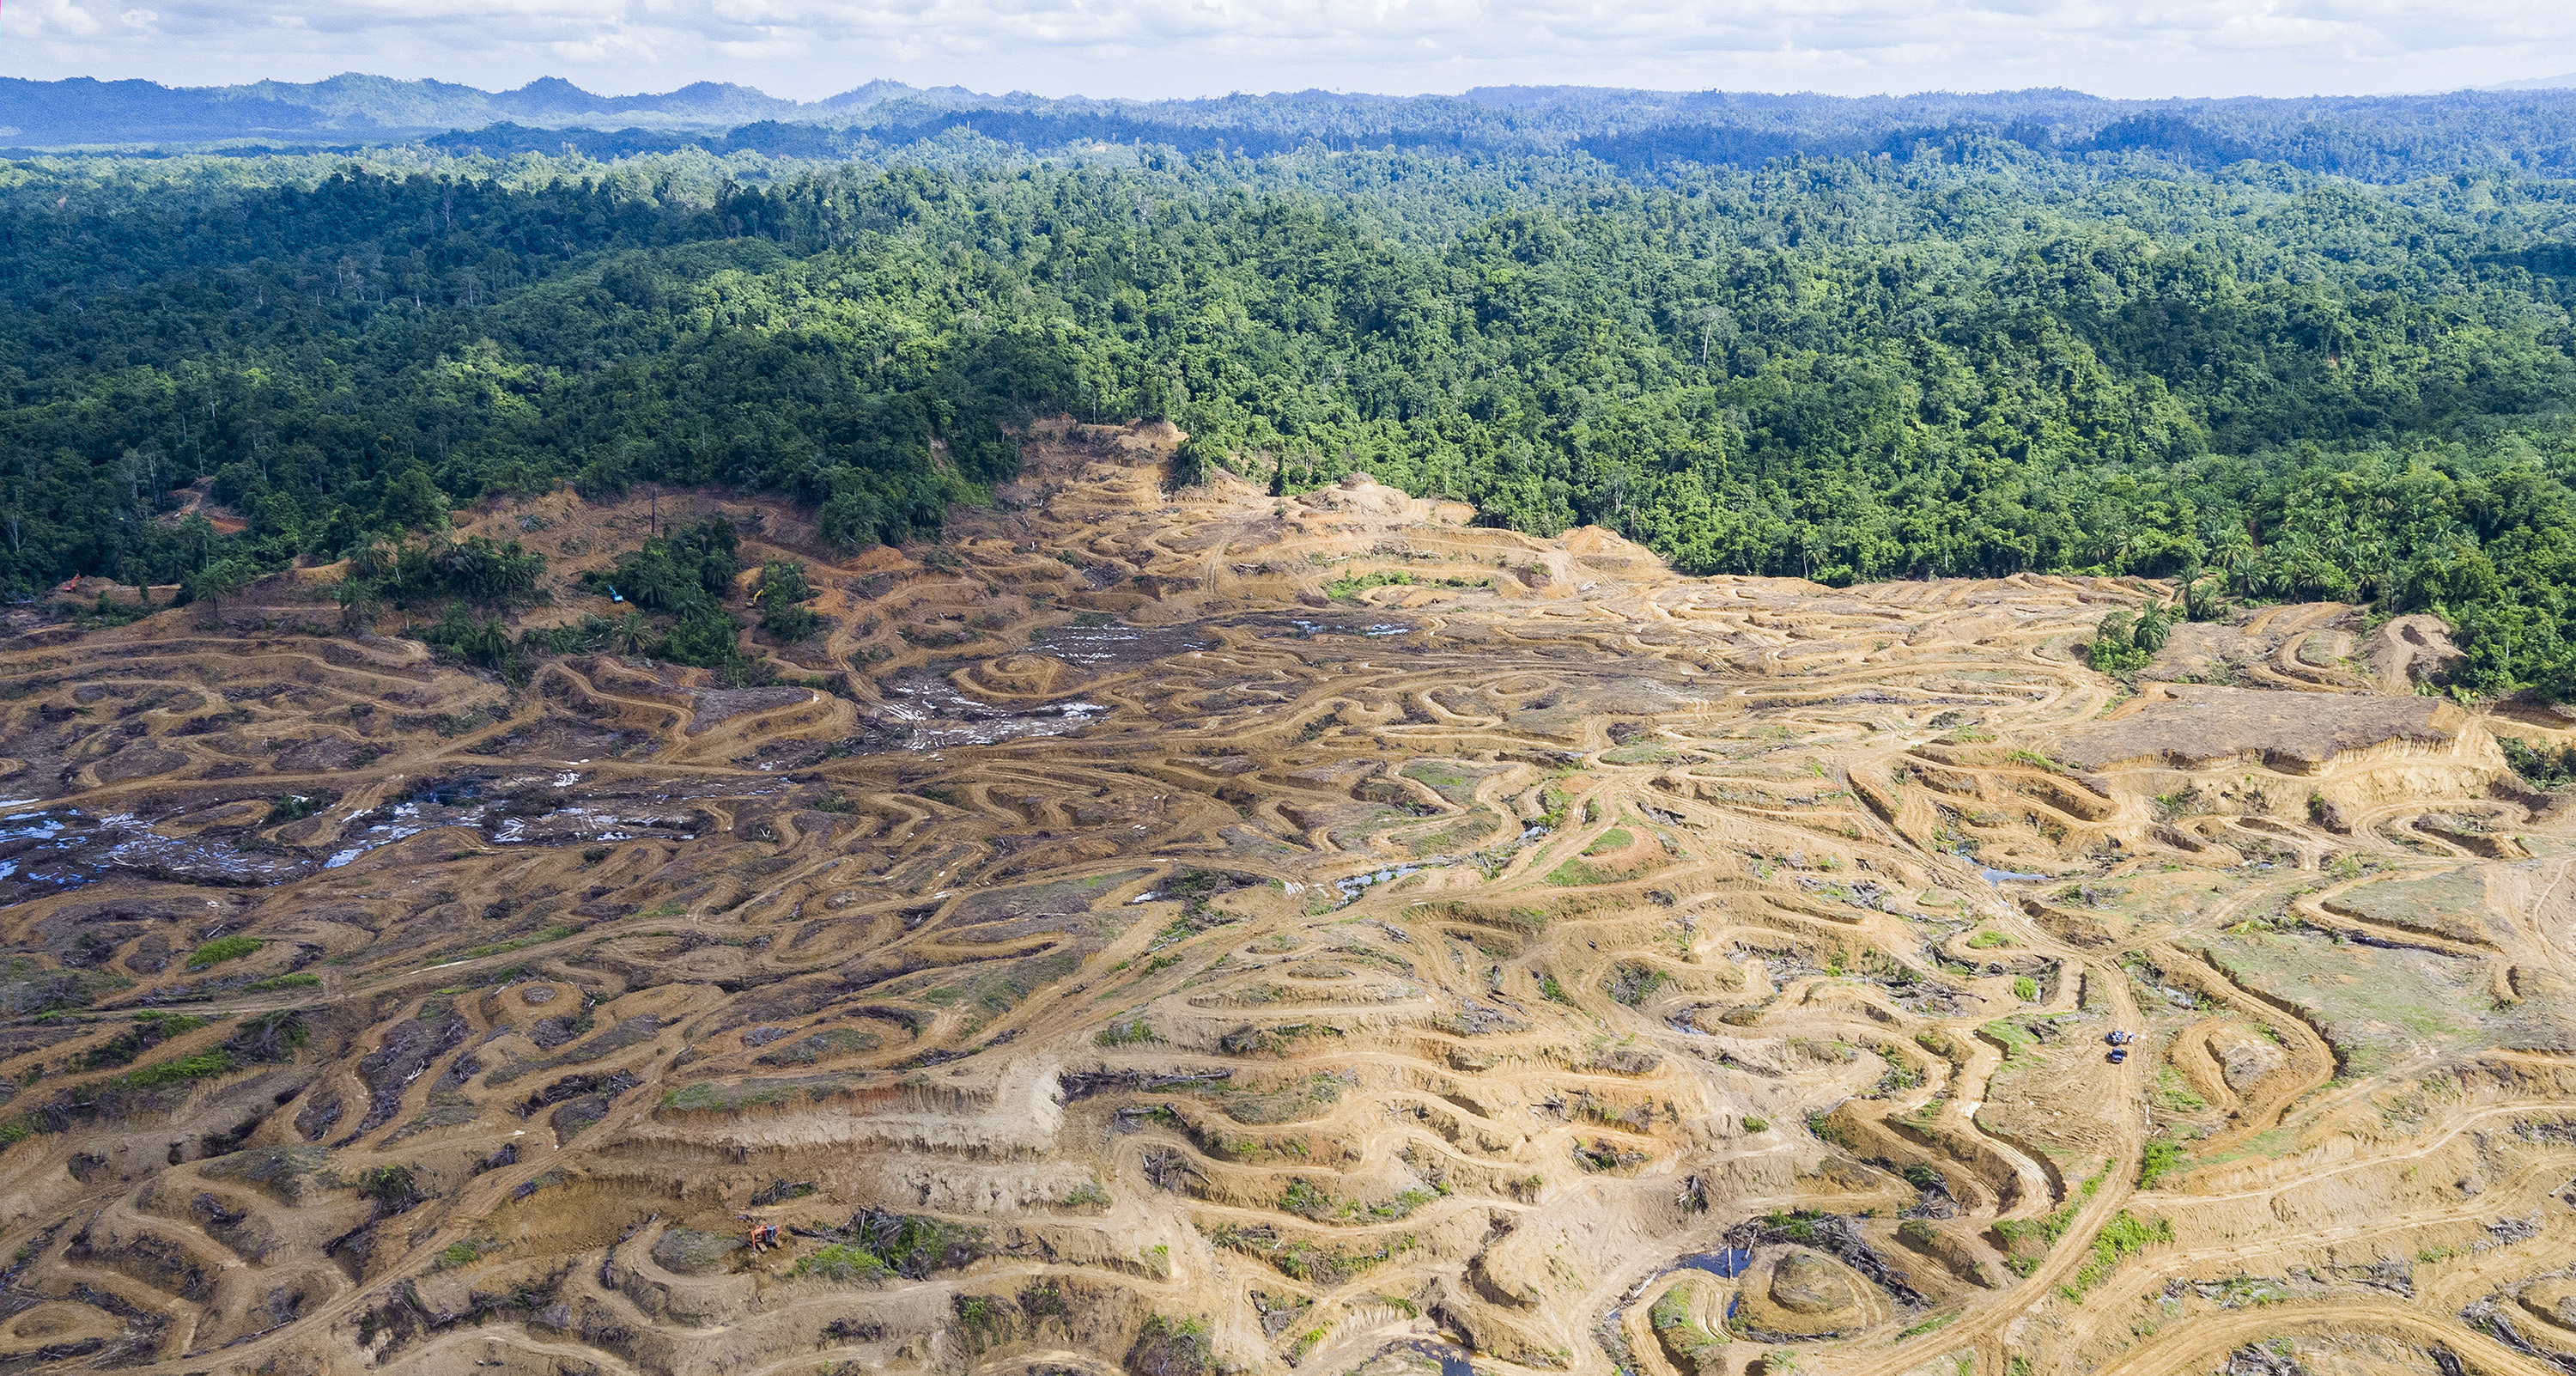 Aerial image of critically important lowland rainforests inside and adjacent to PTPN I Blang Tualang’s palm oil concession in need of protection. October 2018.